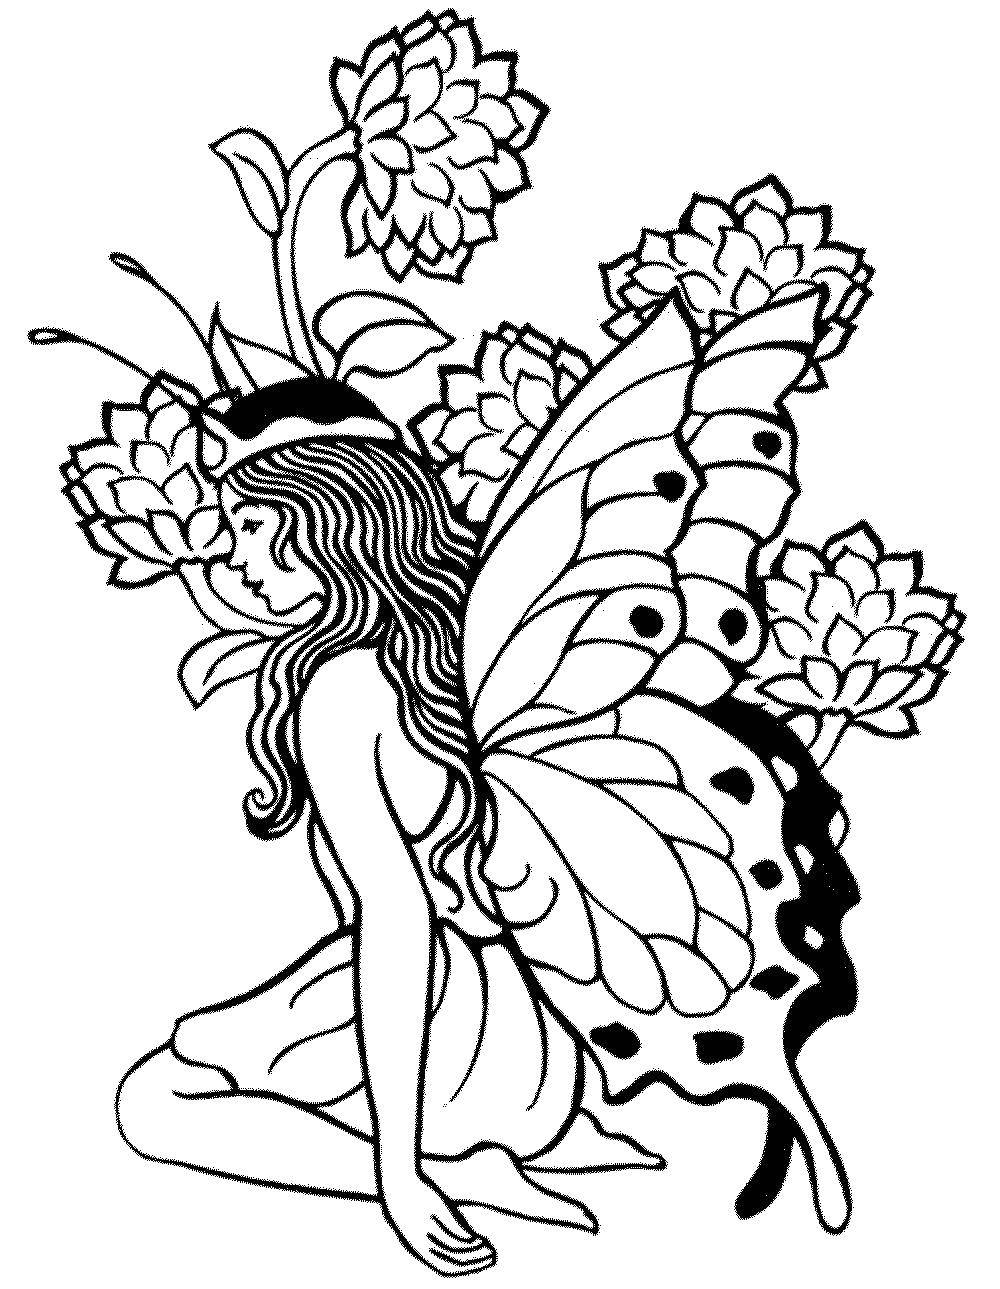 Coloring Forest fairy. Category fairy. Tags:  Fairy, forest, fairy tale.